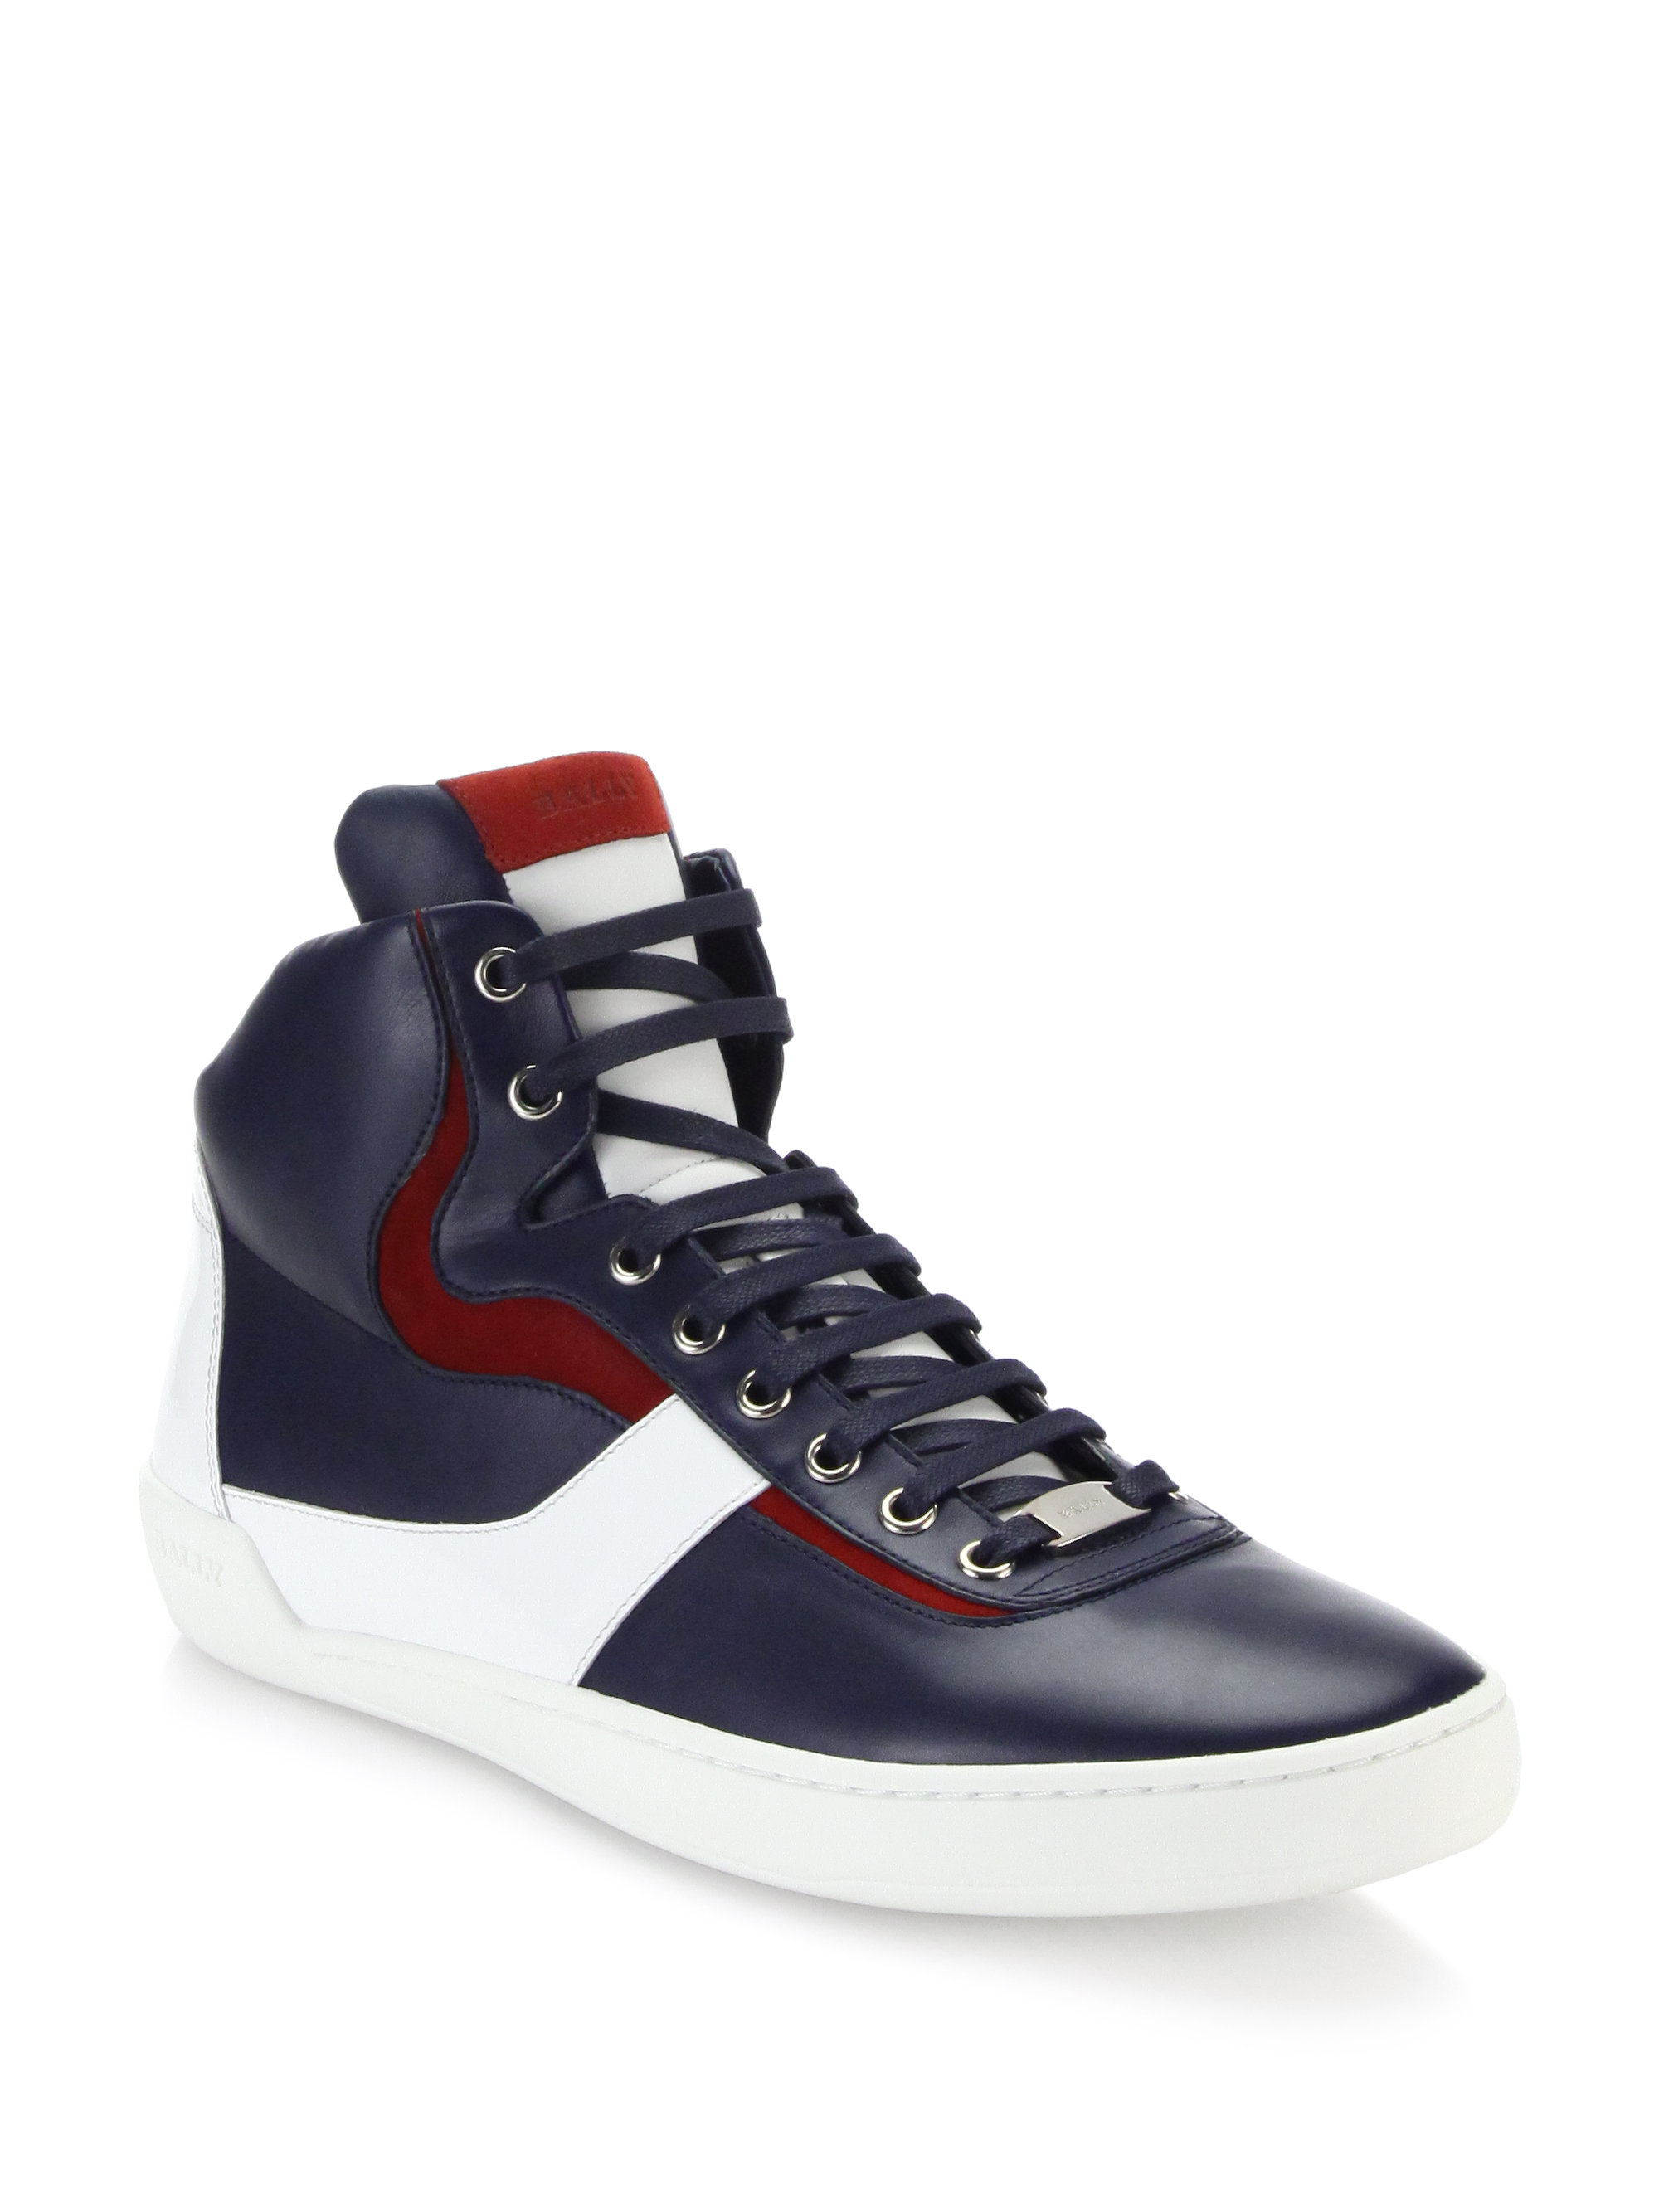 Lyst - Bally Leather High-top Sneakers in Blue for Men